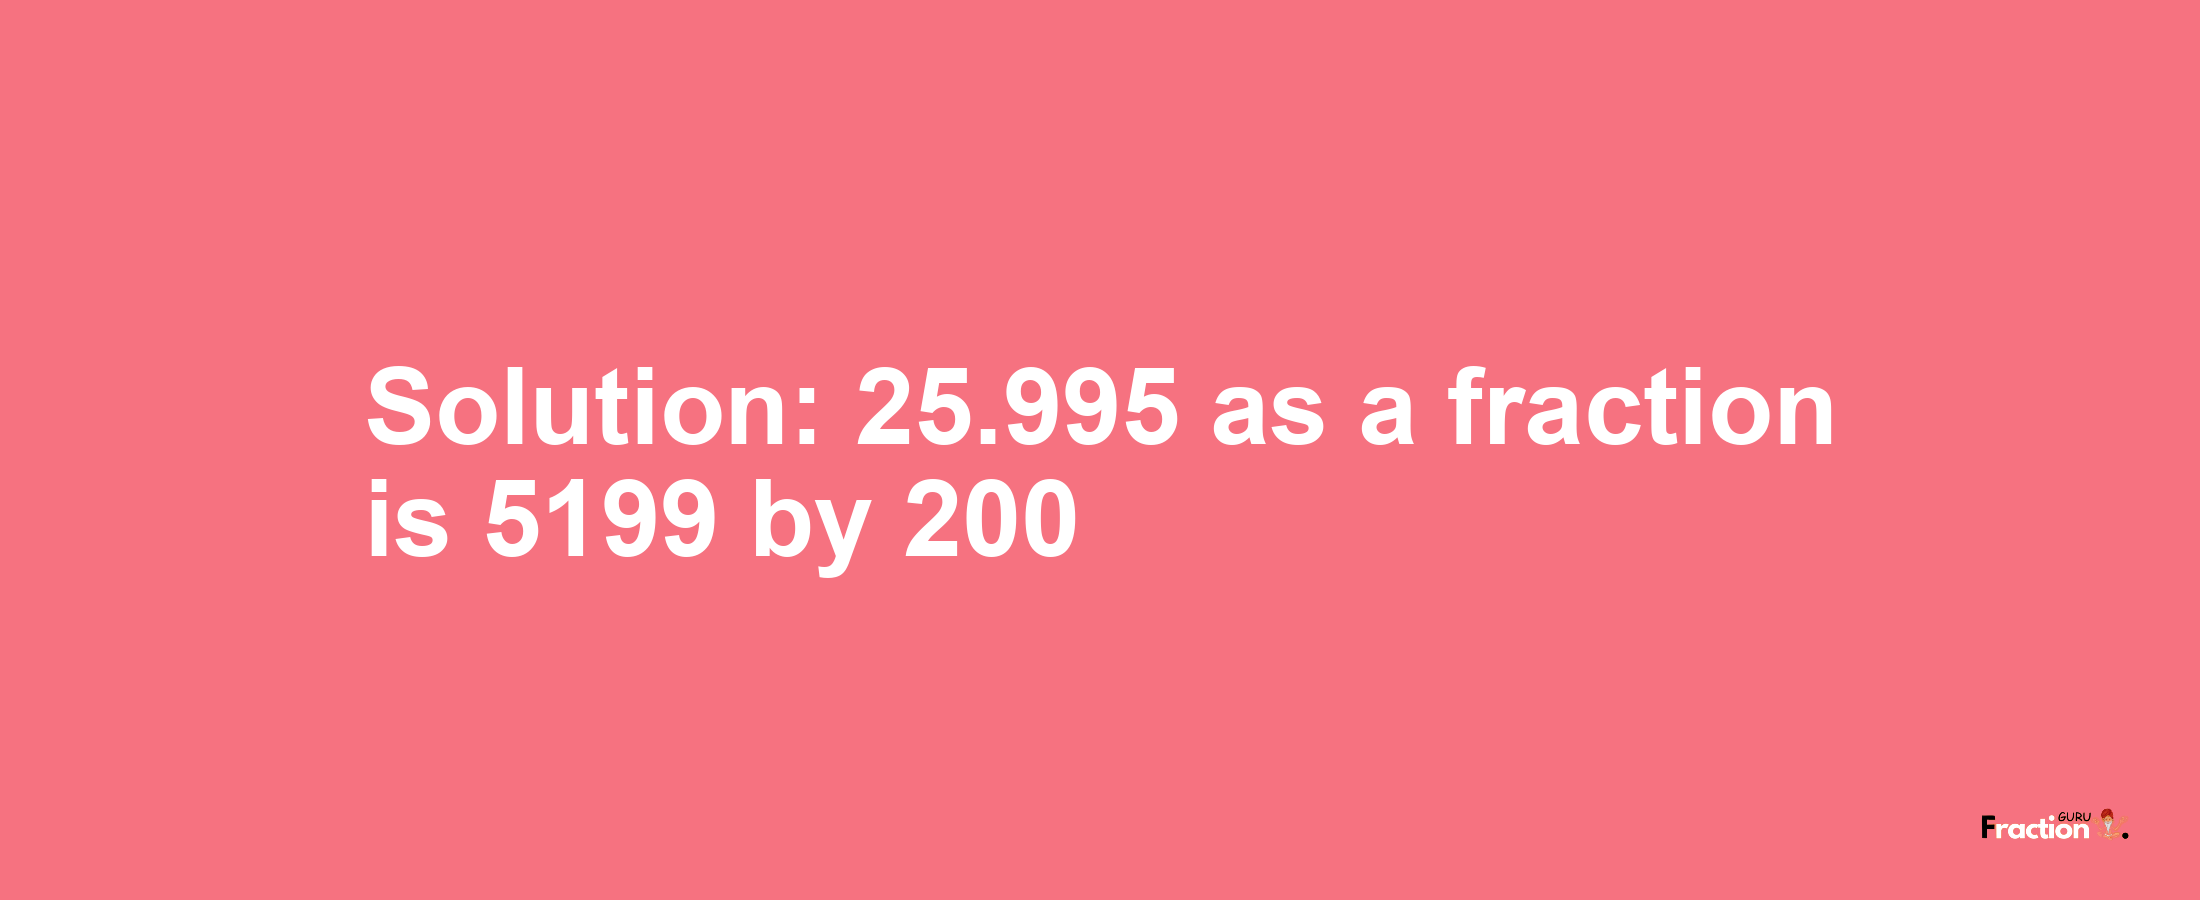 Solution:25.995 as a fraction is 5199/200